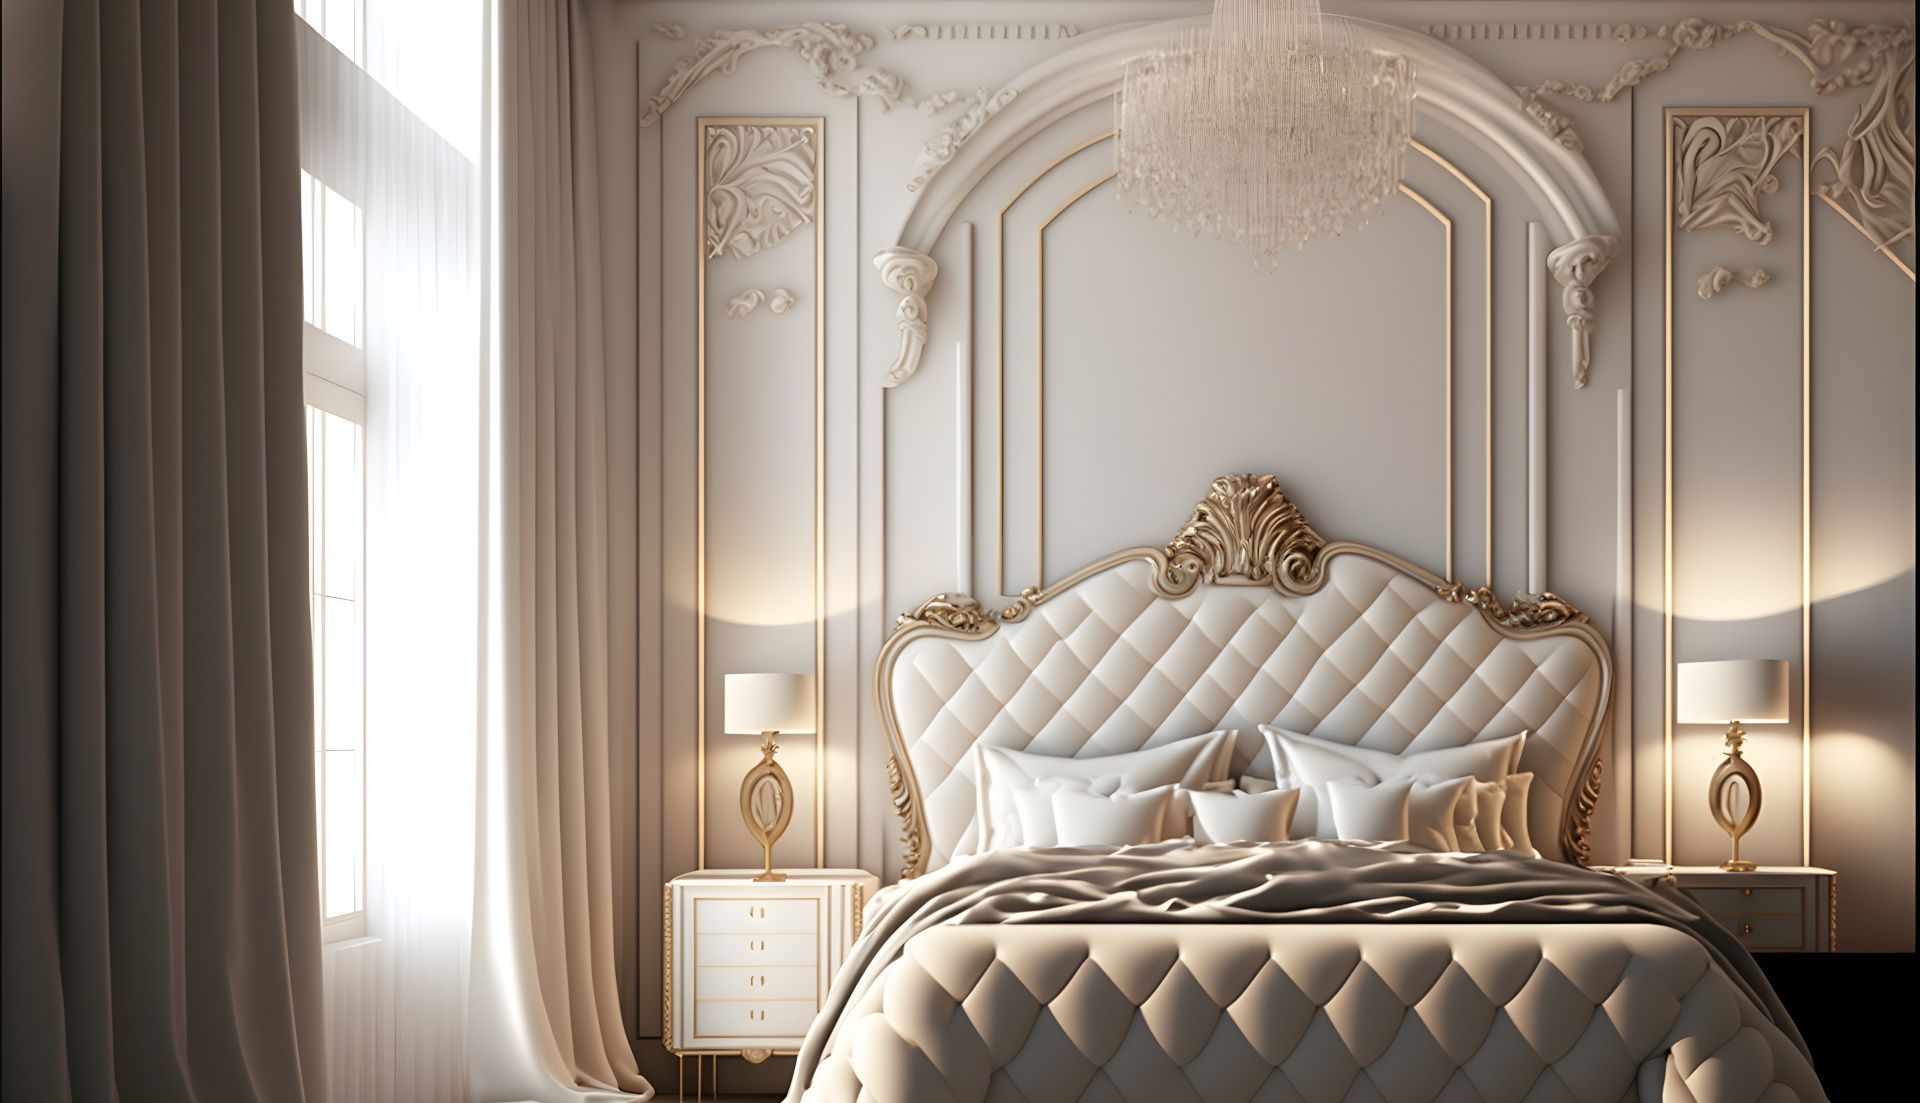 Bedroom with decorative moulding